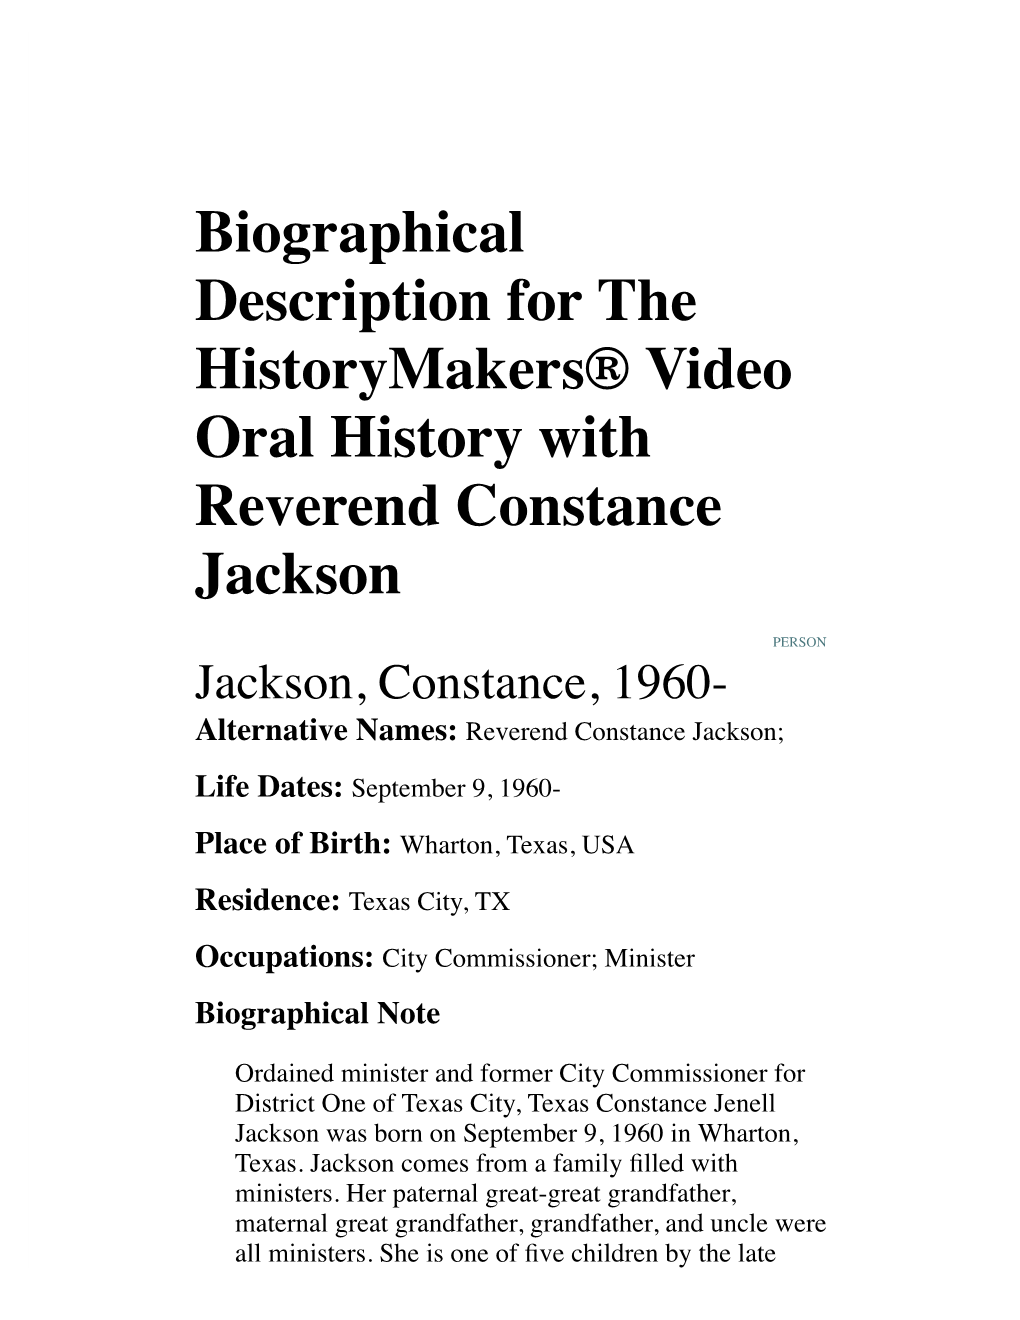 Biographical Description for the Historymakers® Video Oral History with Reverend Constance Jackson